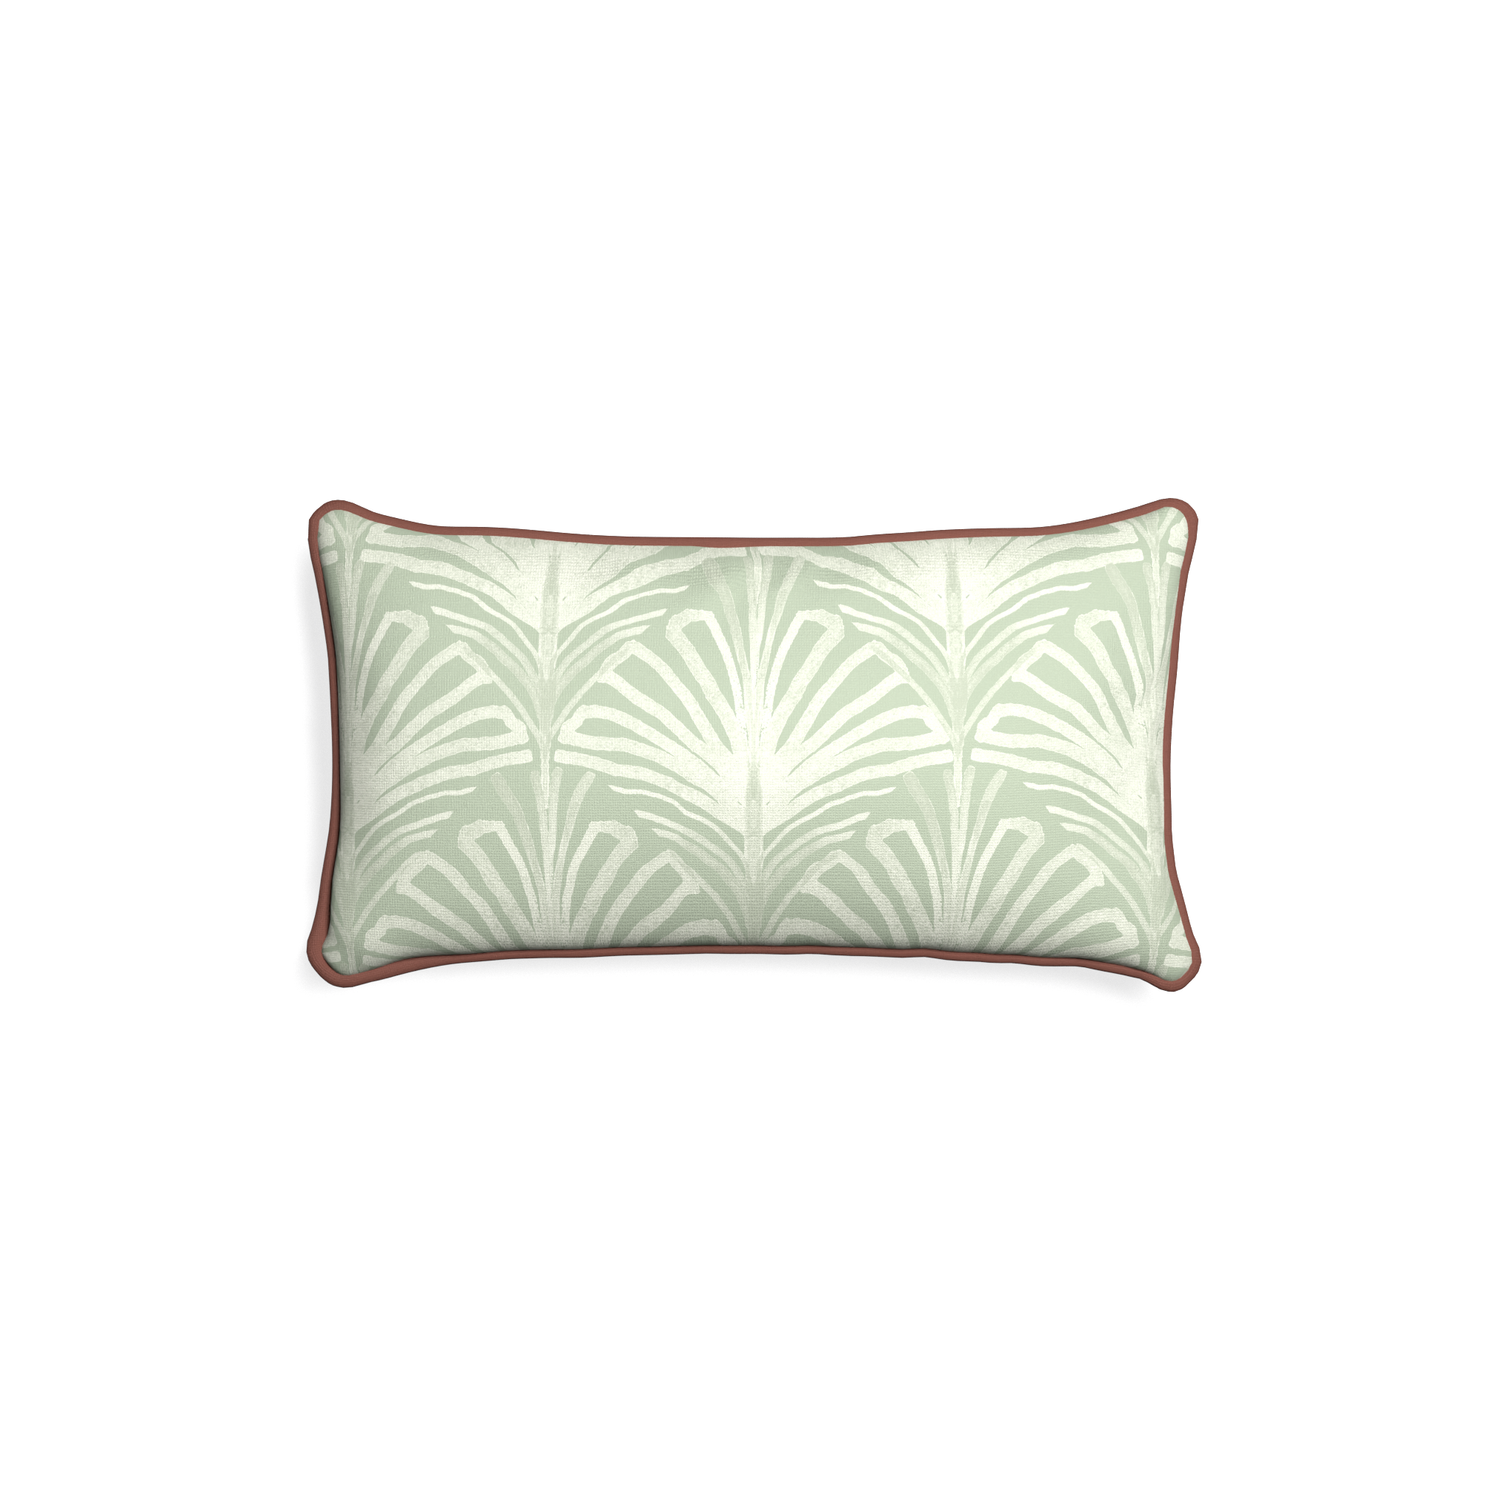 Petite-lumbar suzy sage custom sage green palmpillow with w piping on white background